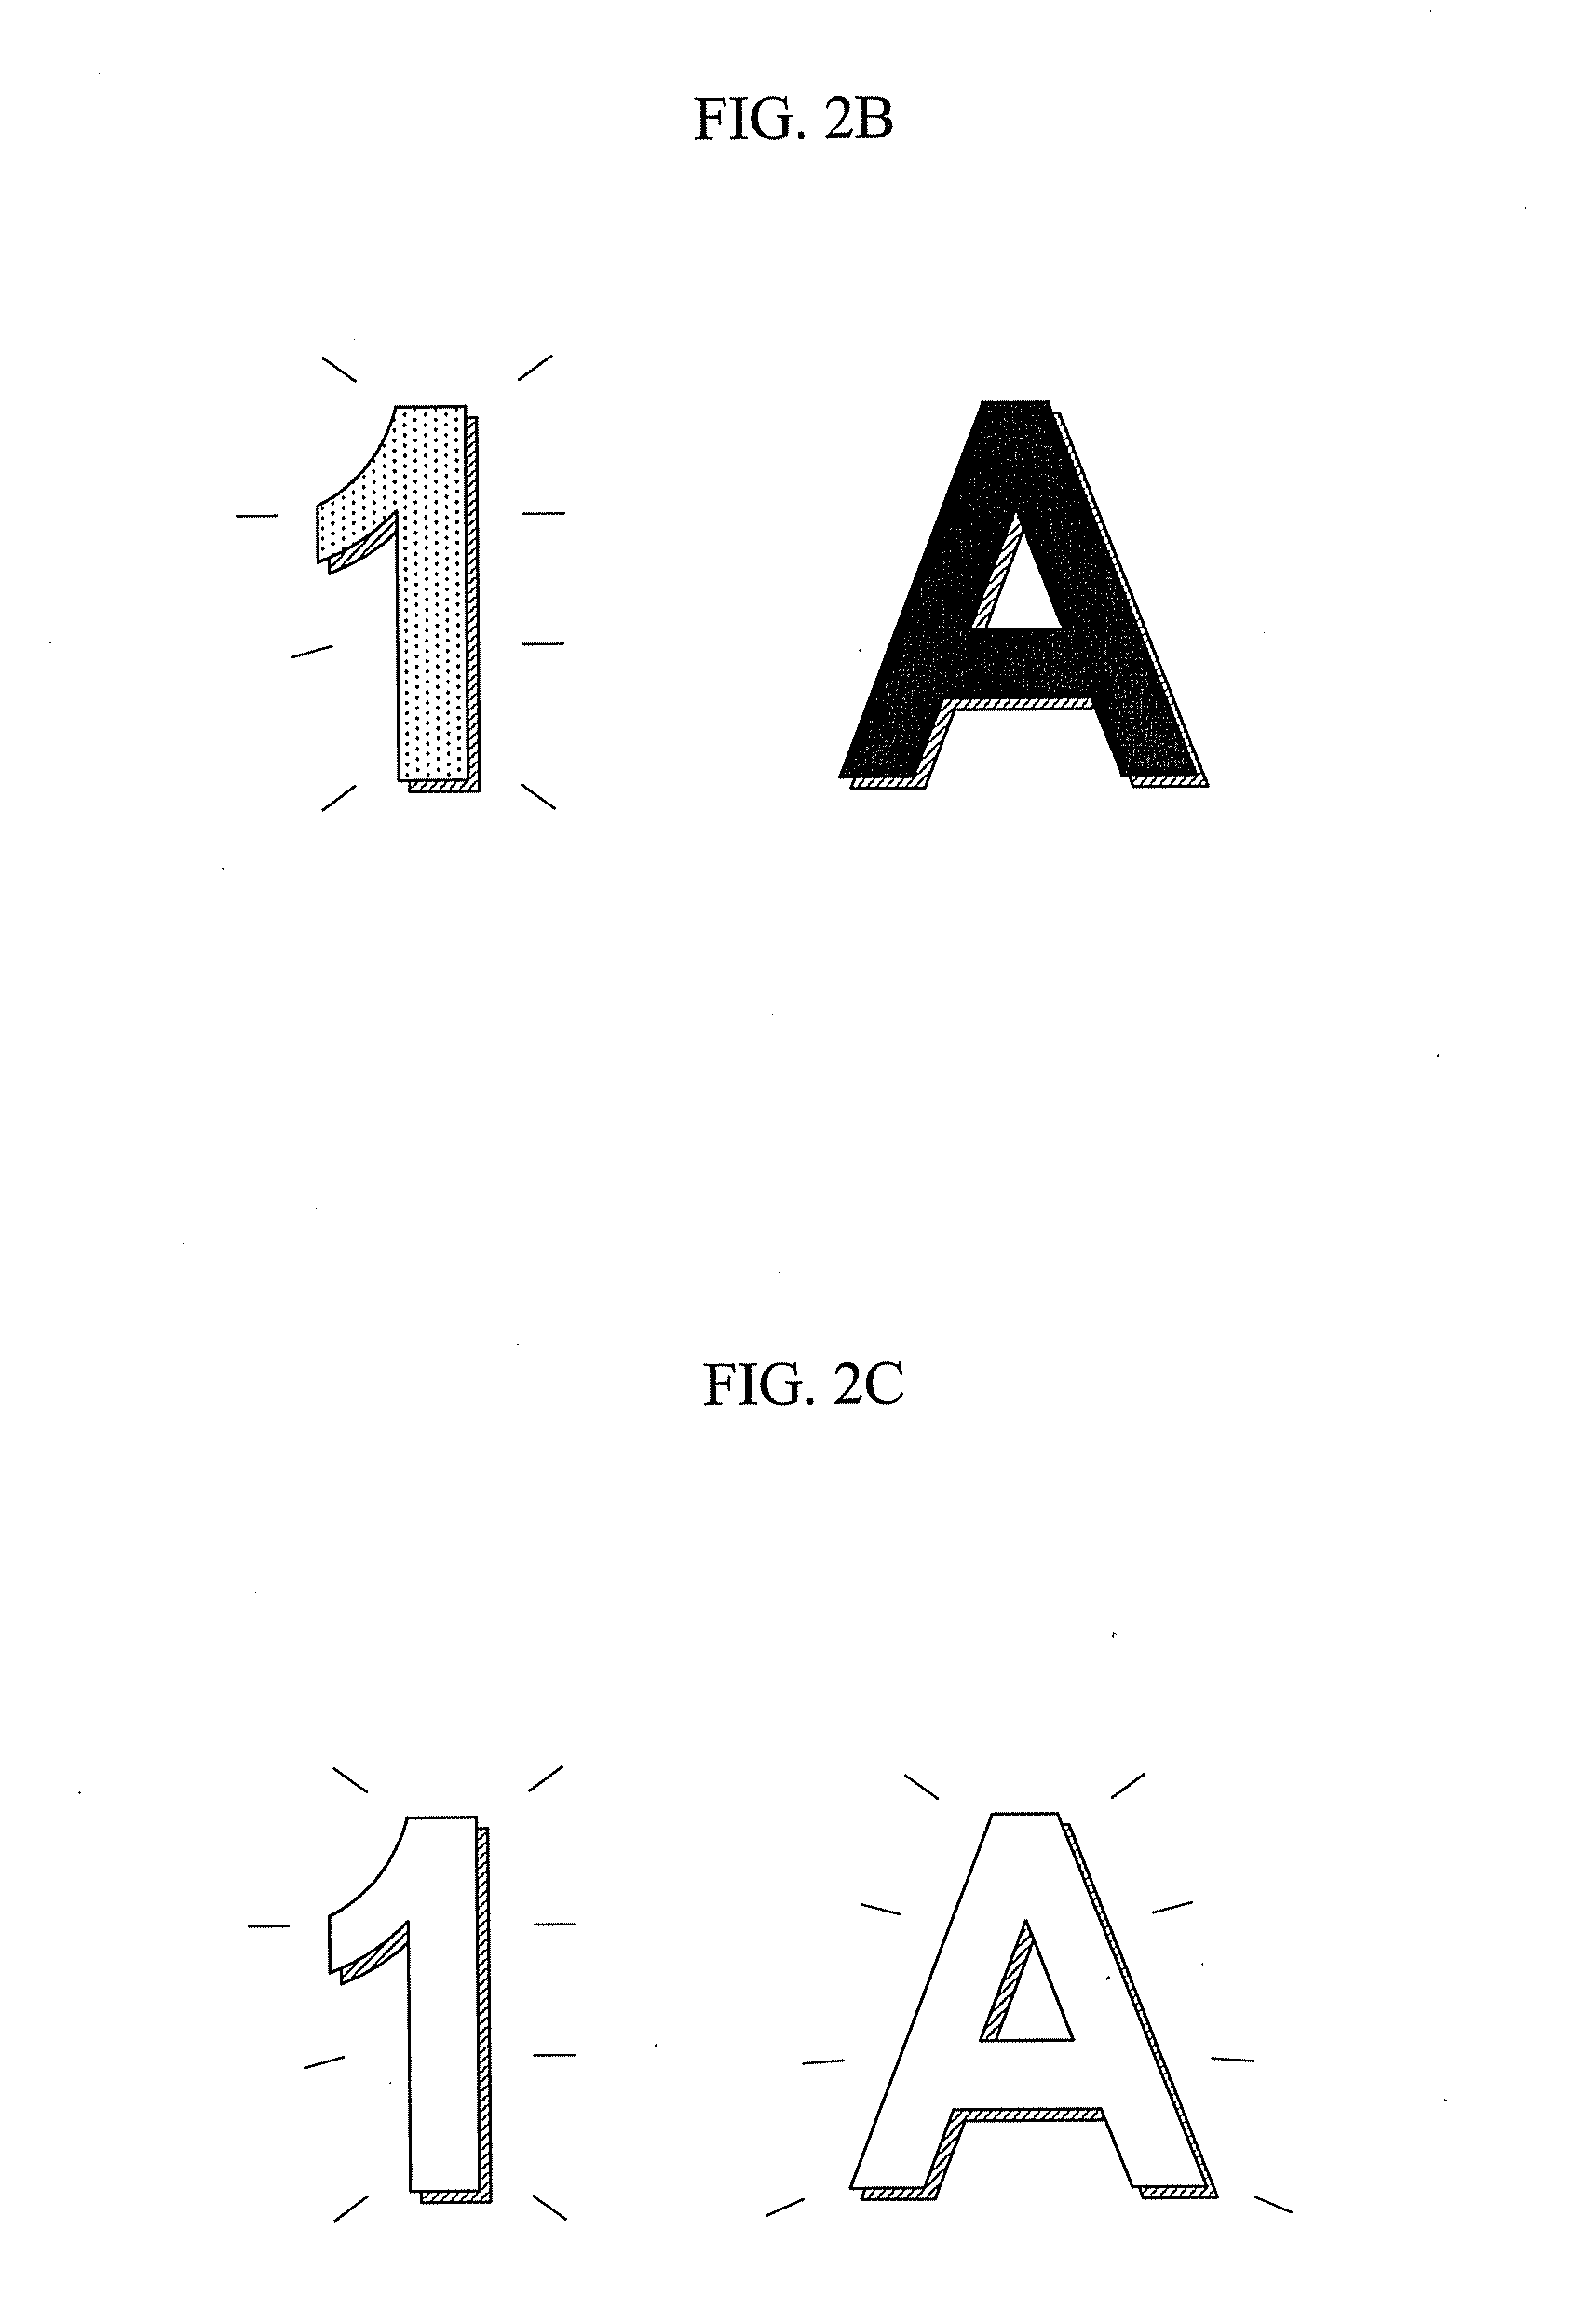 Image display device with plural light emitting diodes